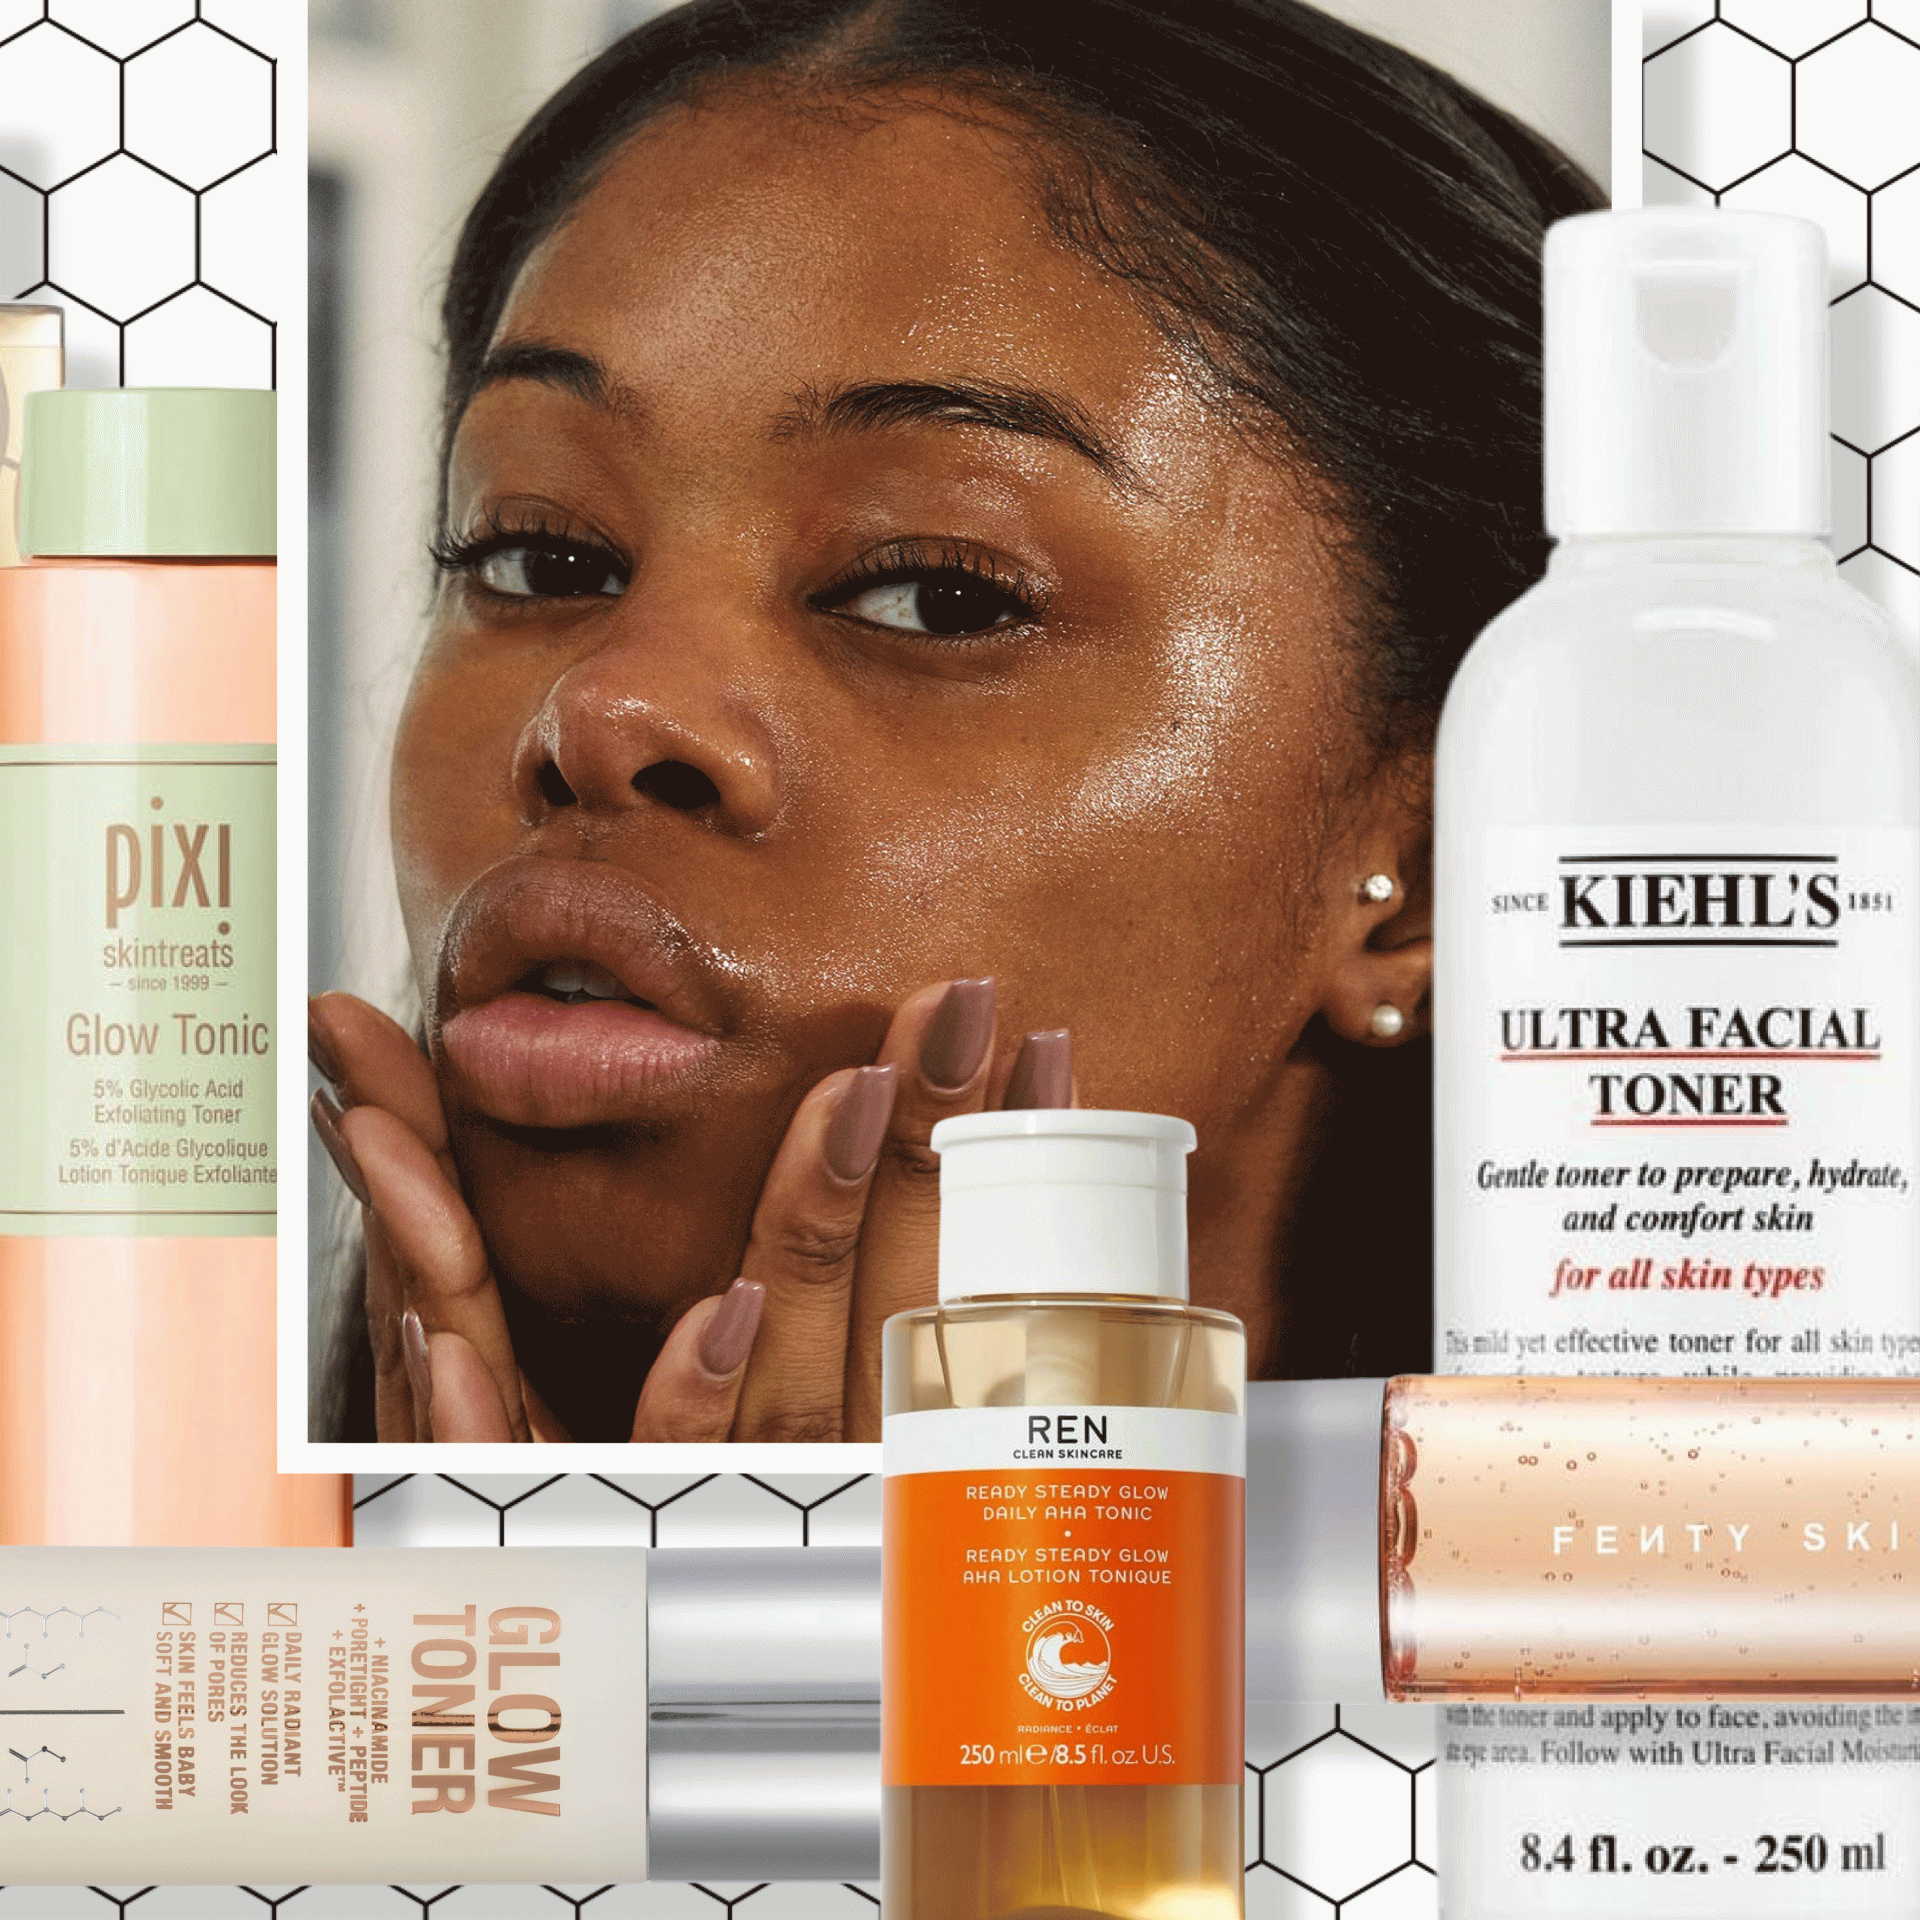 Do really need a face toner in your skincare routine?